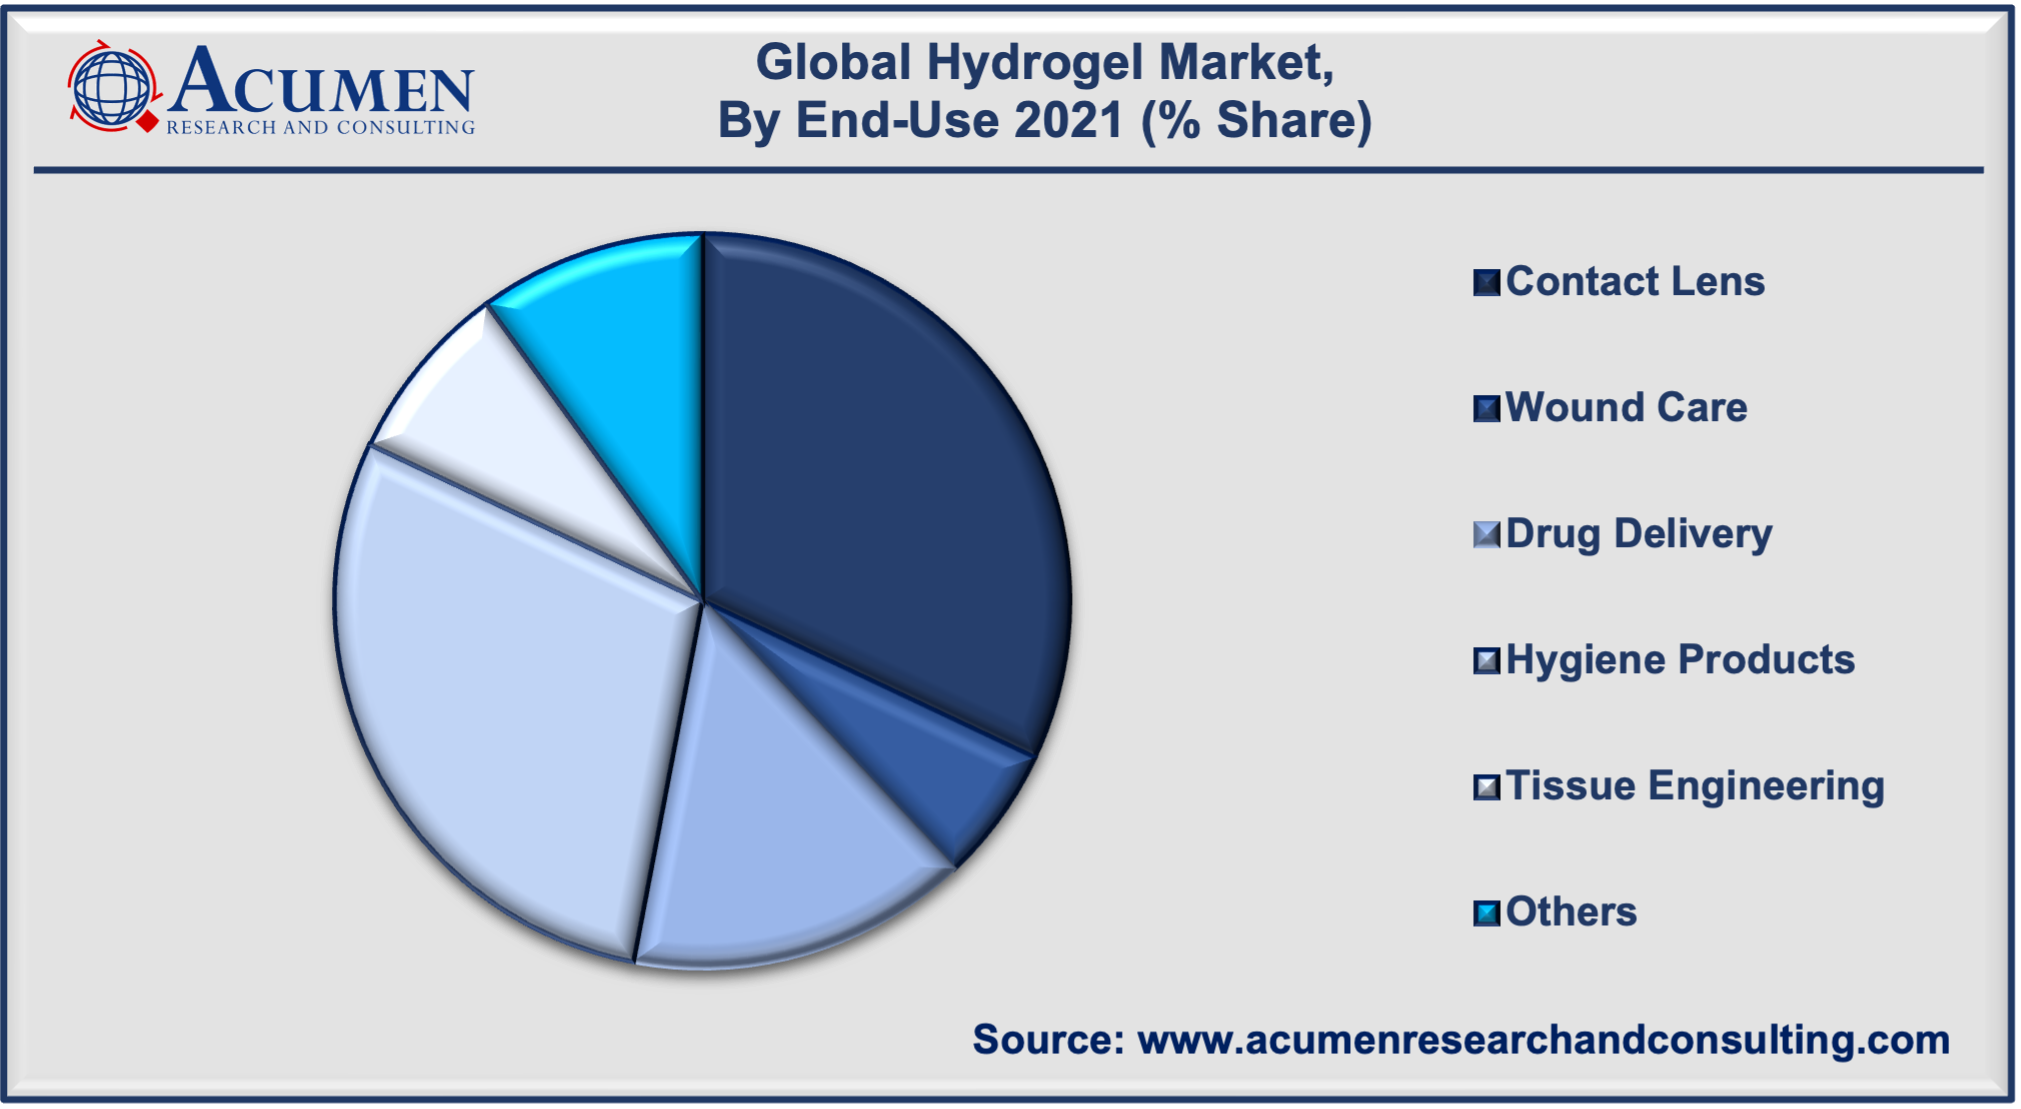 Hydrogel Market Analysis was accounted for USD 23,036 Million in 2021 and is estimated to reach USD 38,156 Million by 2030, with a CAGR of 6.1% from 2022 to 2030.